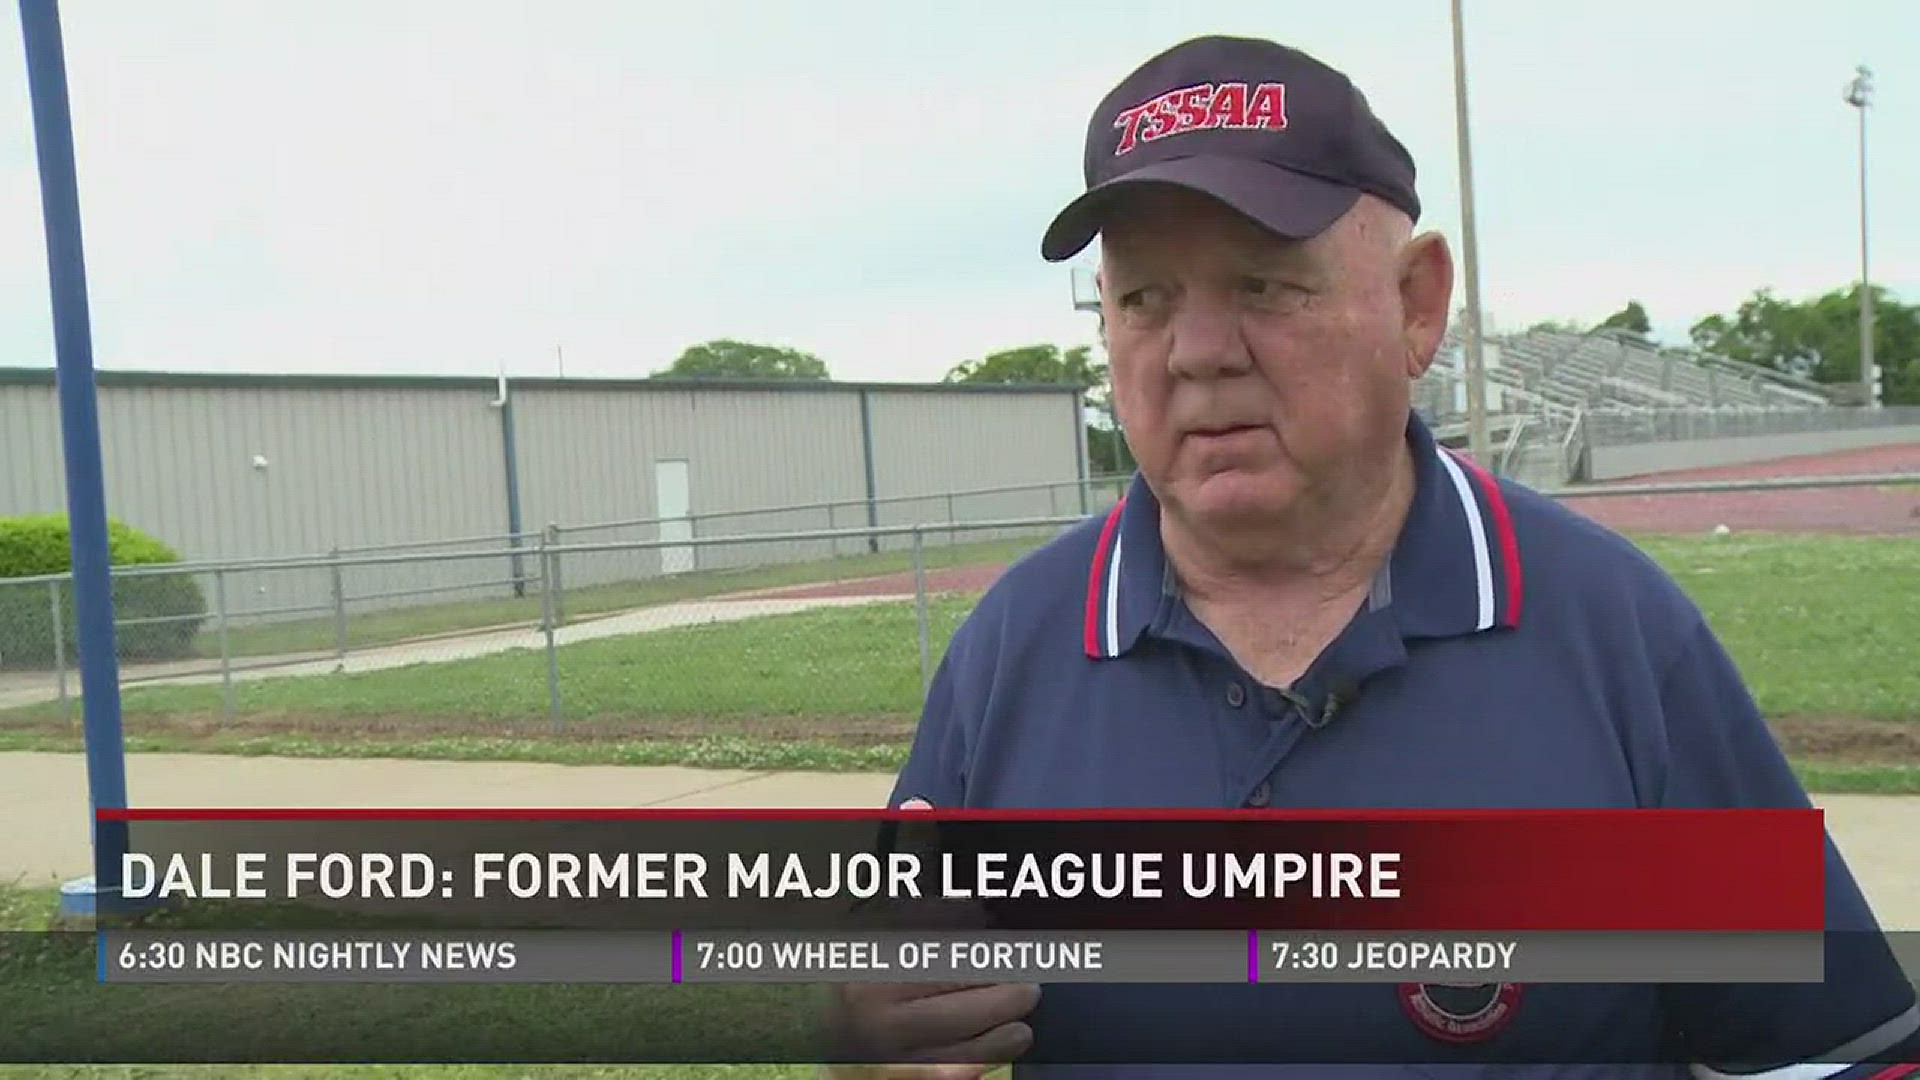 From the Nolan Ryan/Robin Ventura fight to Game 6 of the 1986 World Series, East Tennessee native Dale Ford has been on the field for some great baseball moments. An MLB umpire for more than 20 years, Ford shares his stories.